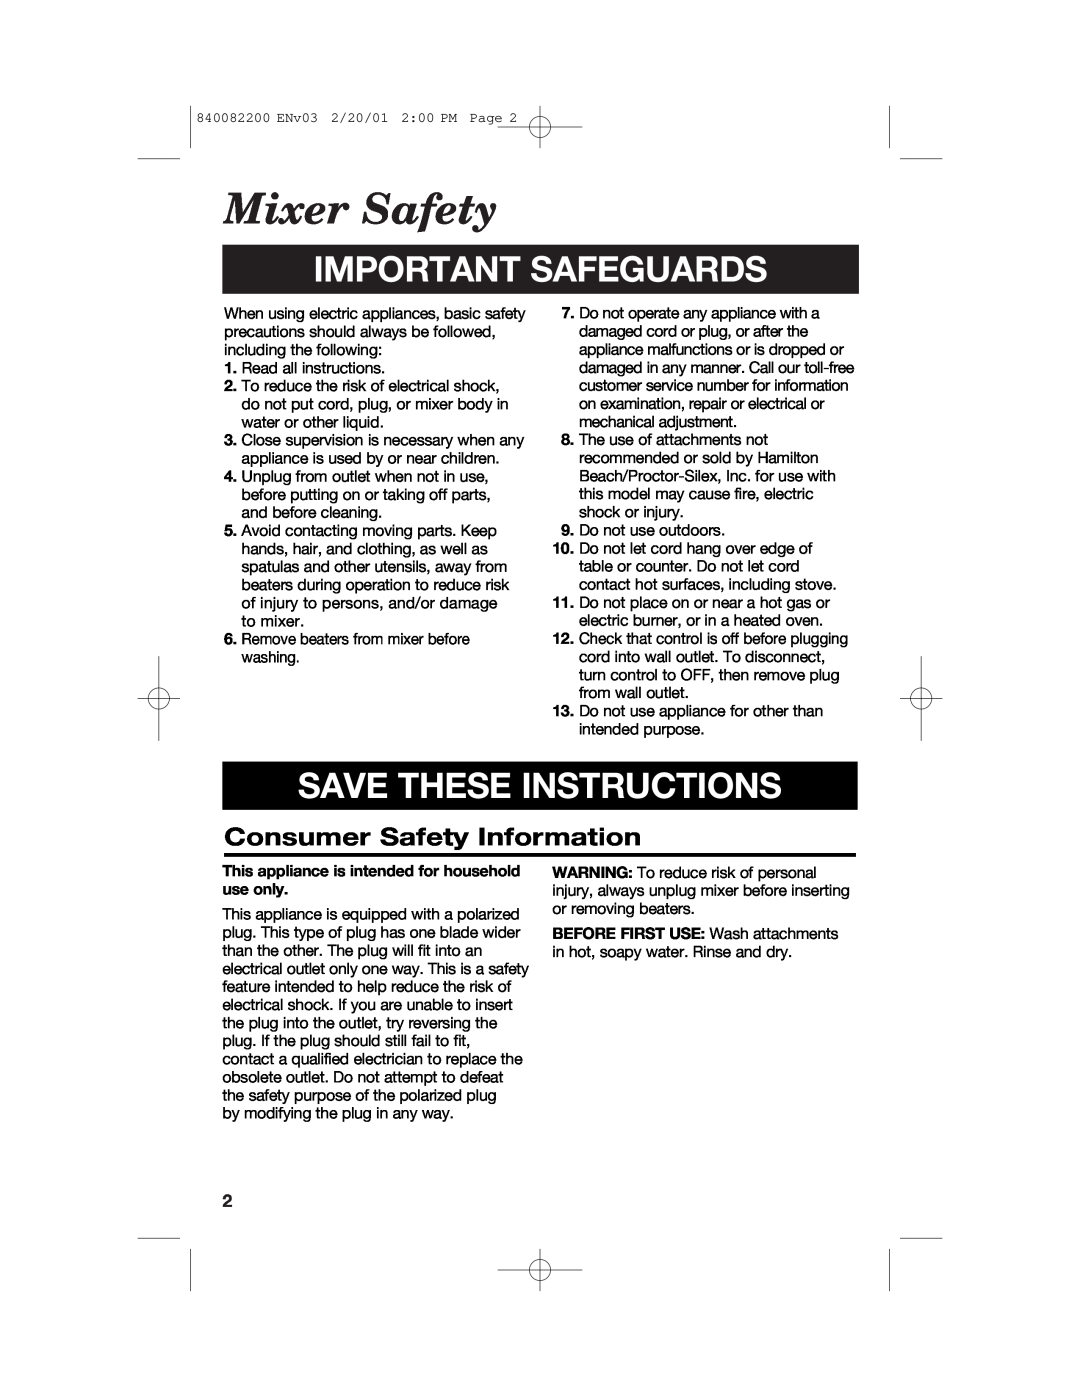 Hamilton Beach 62695RC manual Mixer Safety, Consumer Safety Information, Important Safeguards, Save These Instructions 